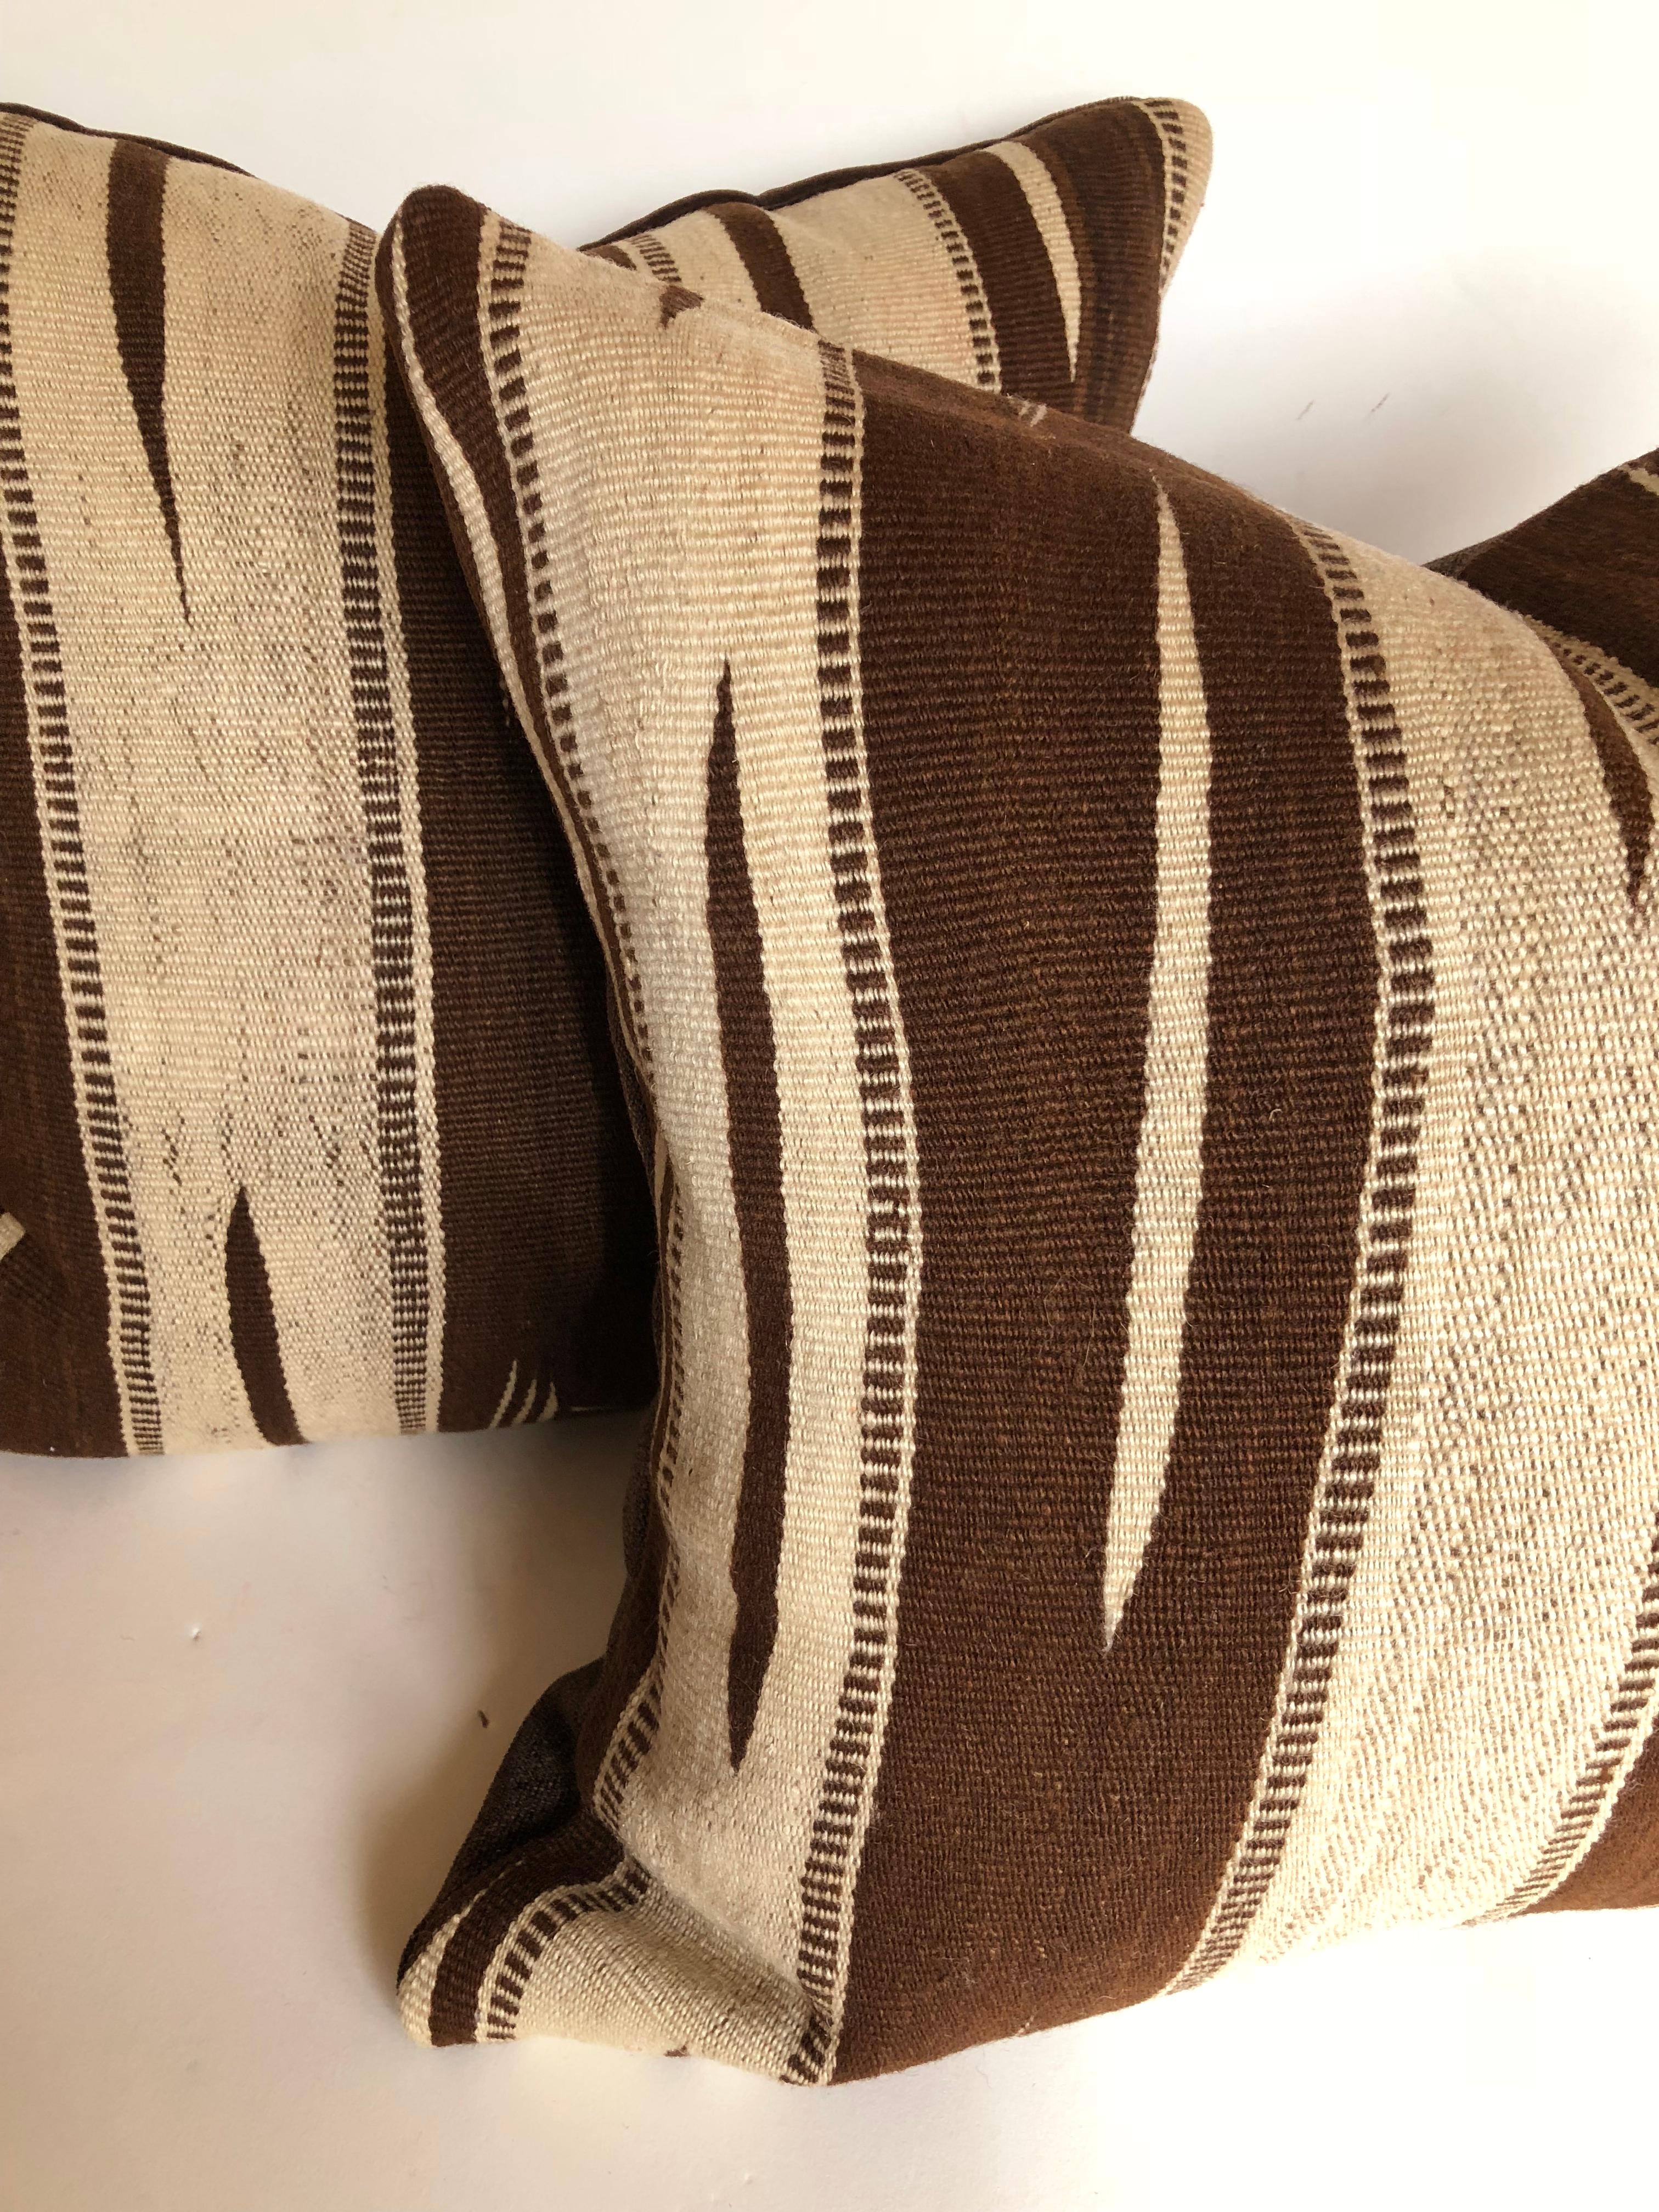 Custom pillows cut from a vintage Moroccan hand loomed wool rug from the Ourika Valley, Atlas Mountains. Rugs are make for the maker's personal use, not the commercial market. Wool is soft and lustrous with stripes with a tribal design in natural